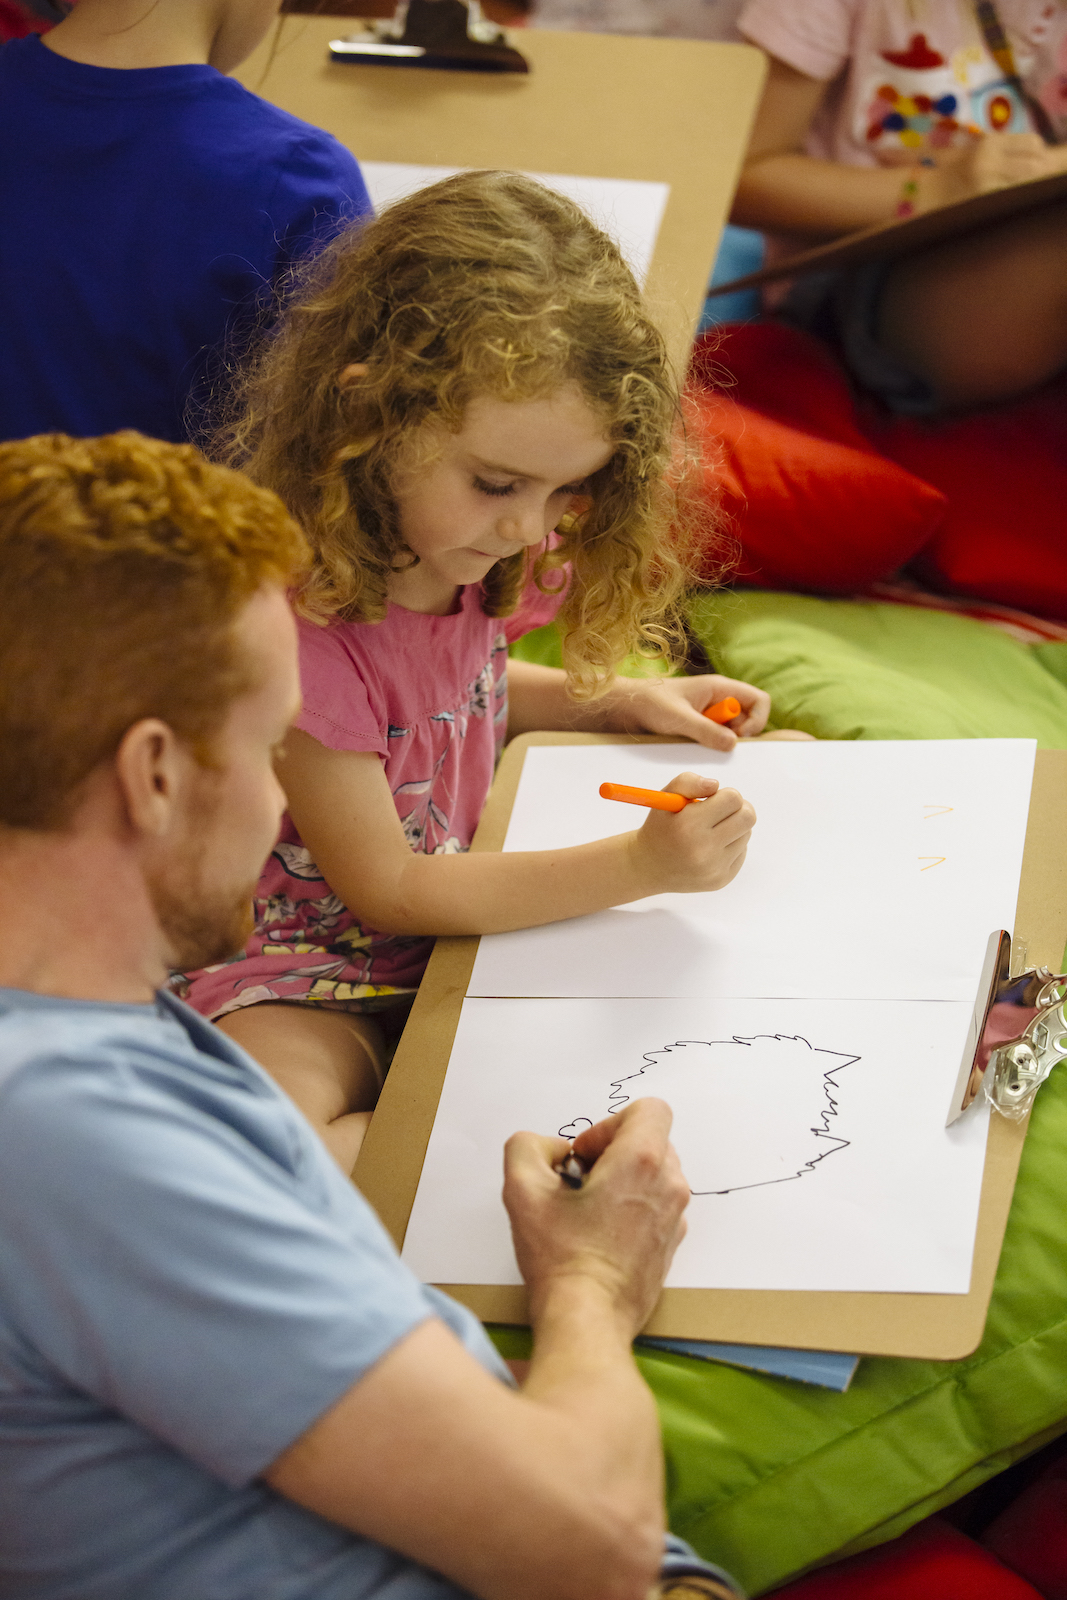 An adult and a child draw on pieces of paper together